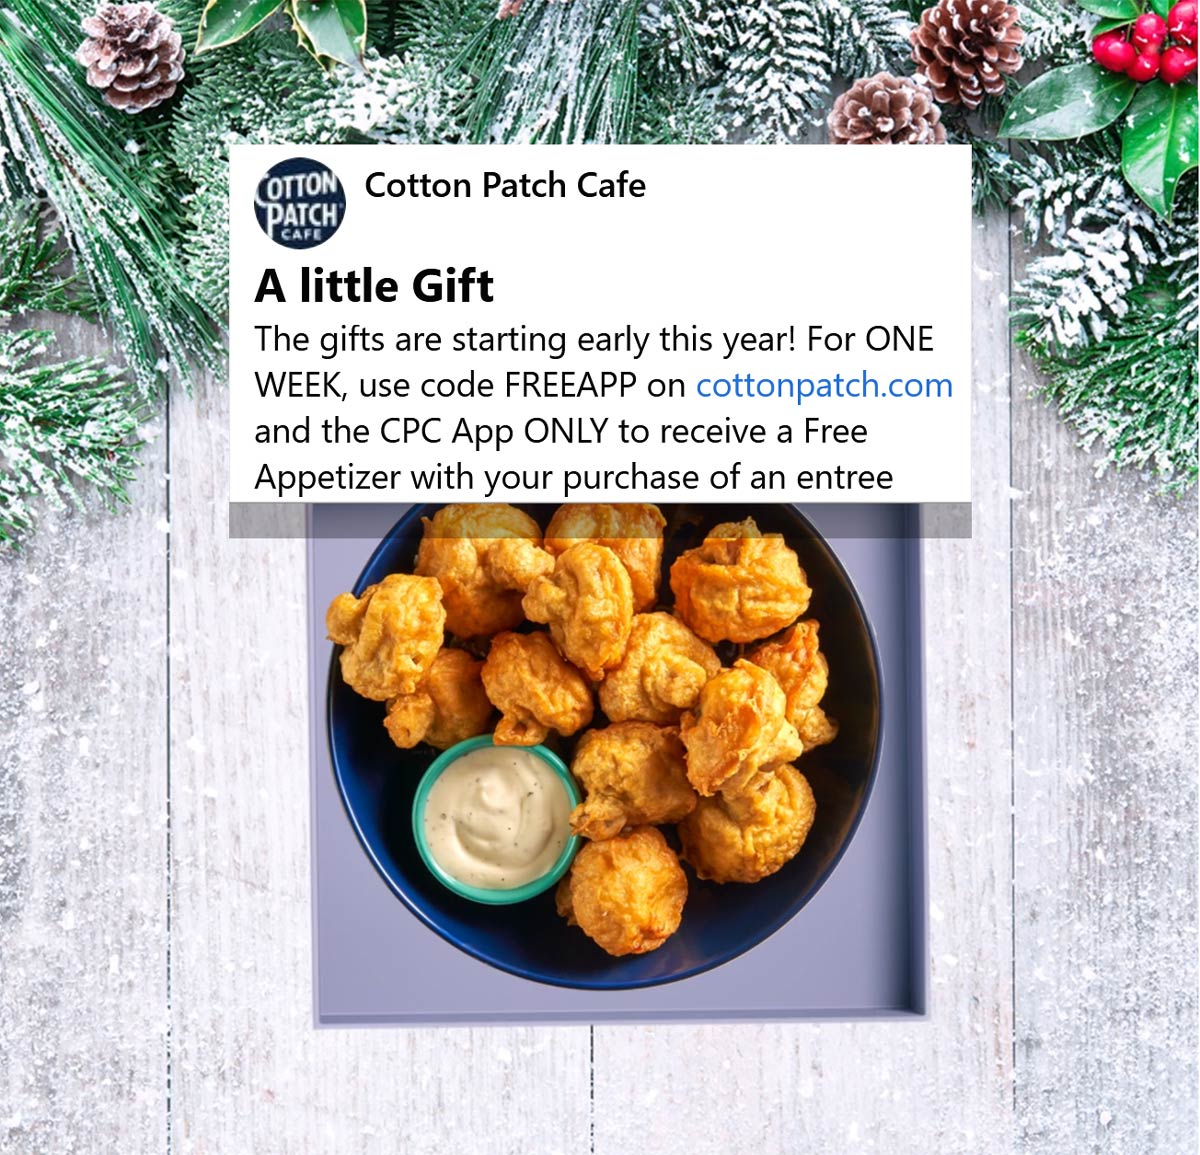 Cotton Patch Cafe restaurants Coupon  Free appetizer with your entree at Cotton Patch Cafe via promo code FREEAPP #cottonpatchcafe 